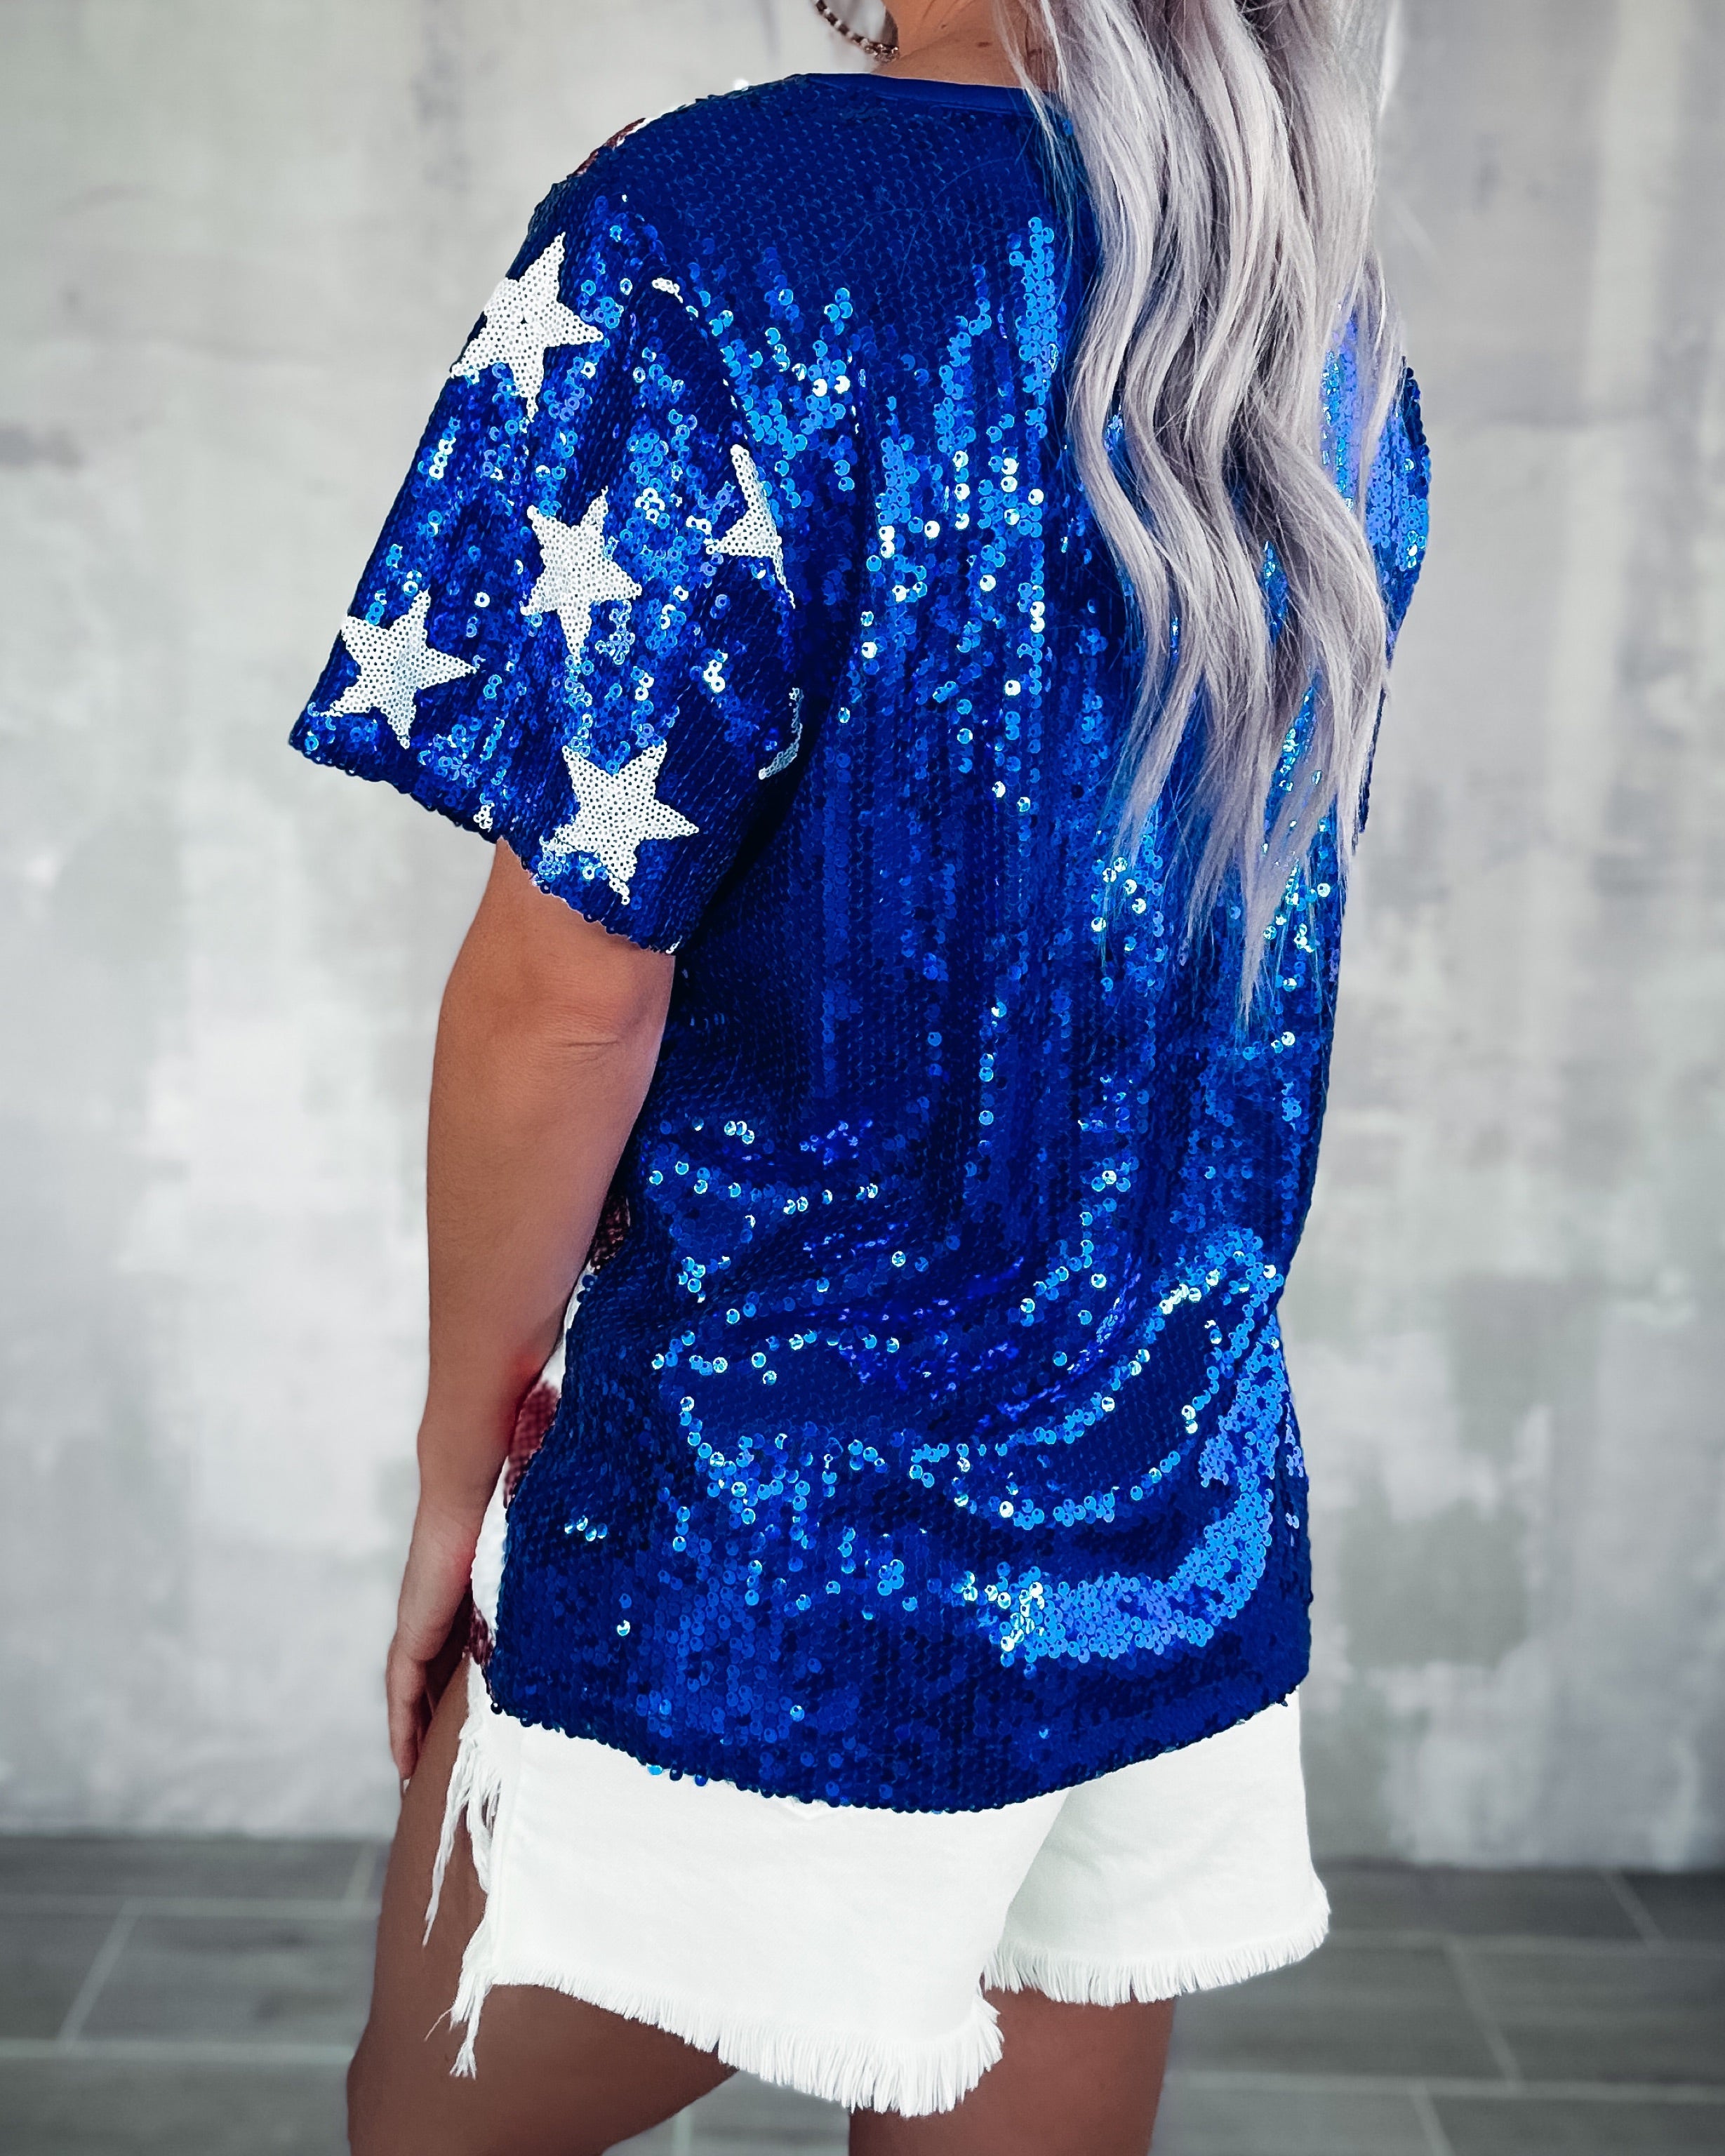 USA Sequin Top - Red/White/Blue